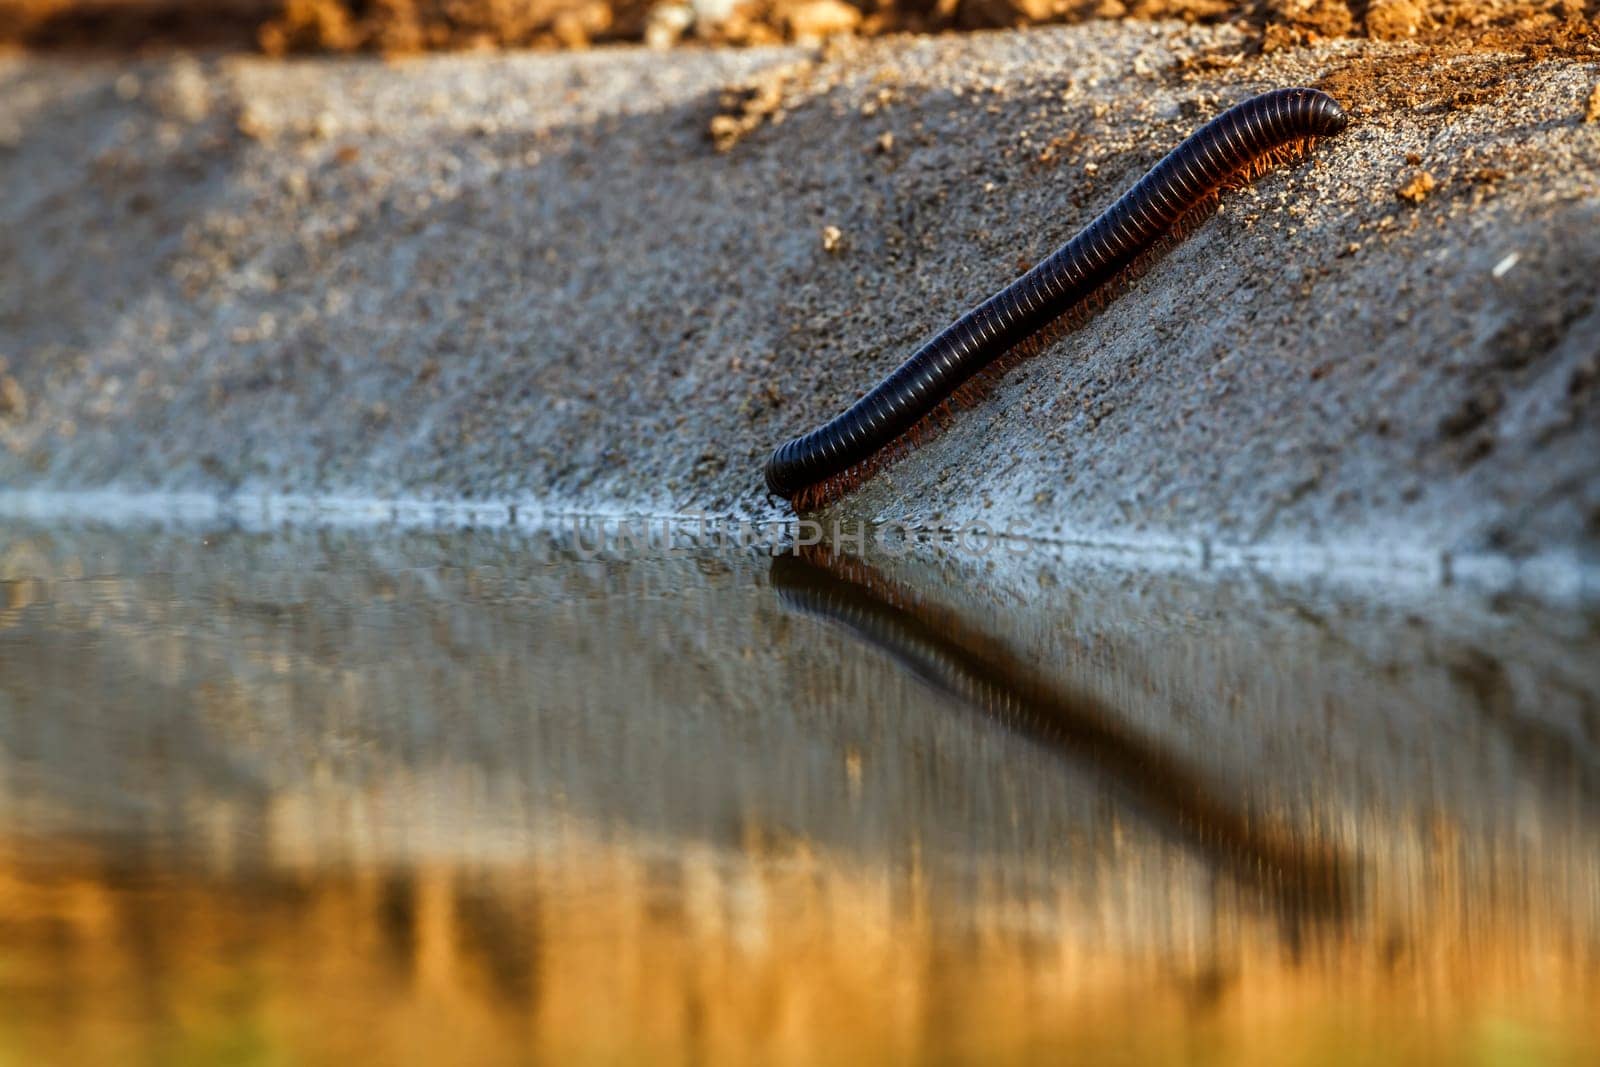 Giant African millipede drinking water at sunset in Kruger National park, South Africa ; Specie Archispirostreptus gigas family of Arthropod